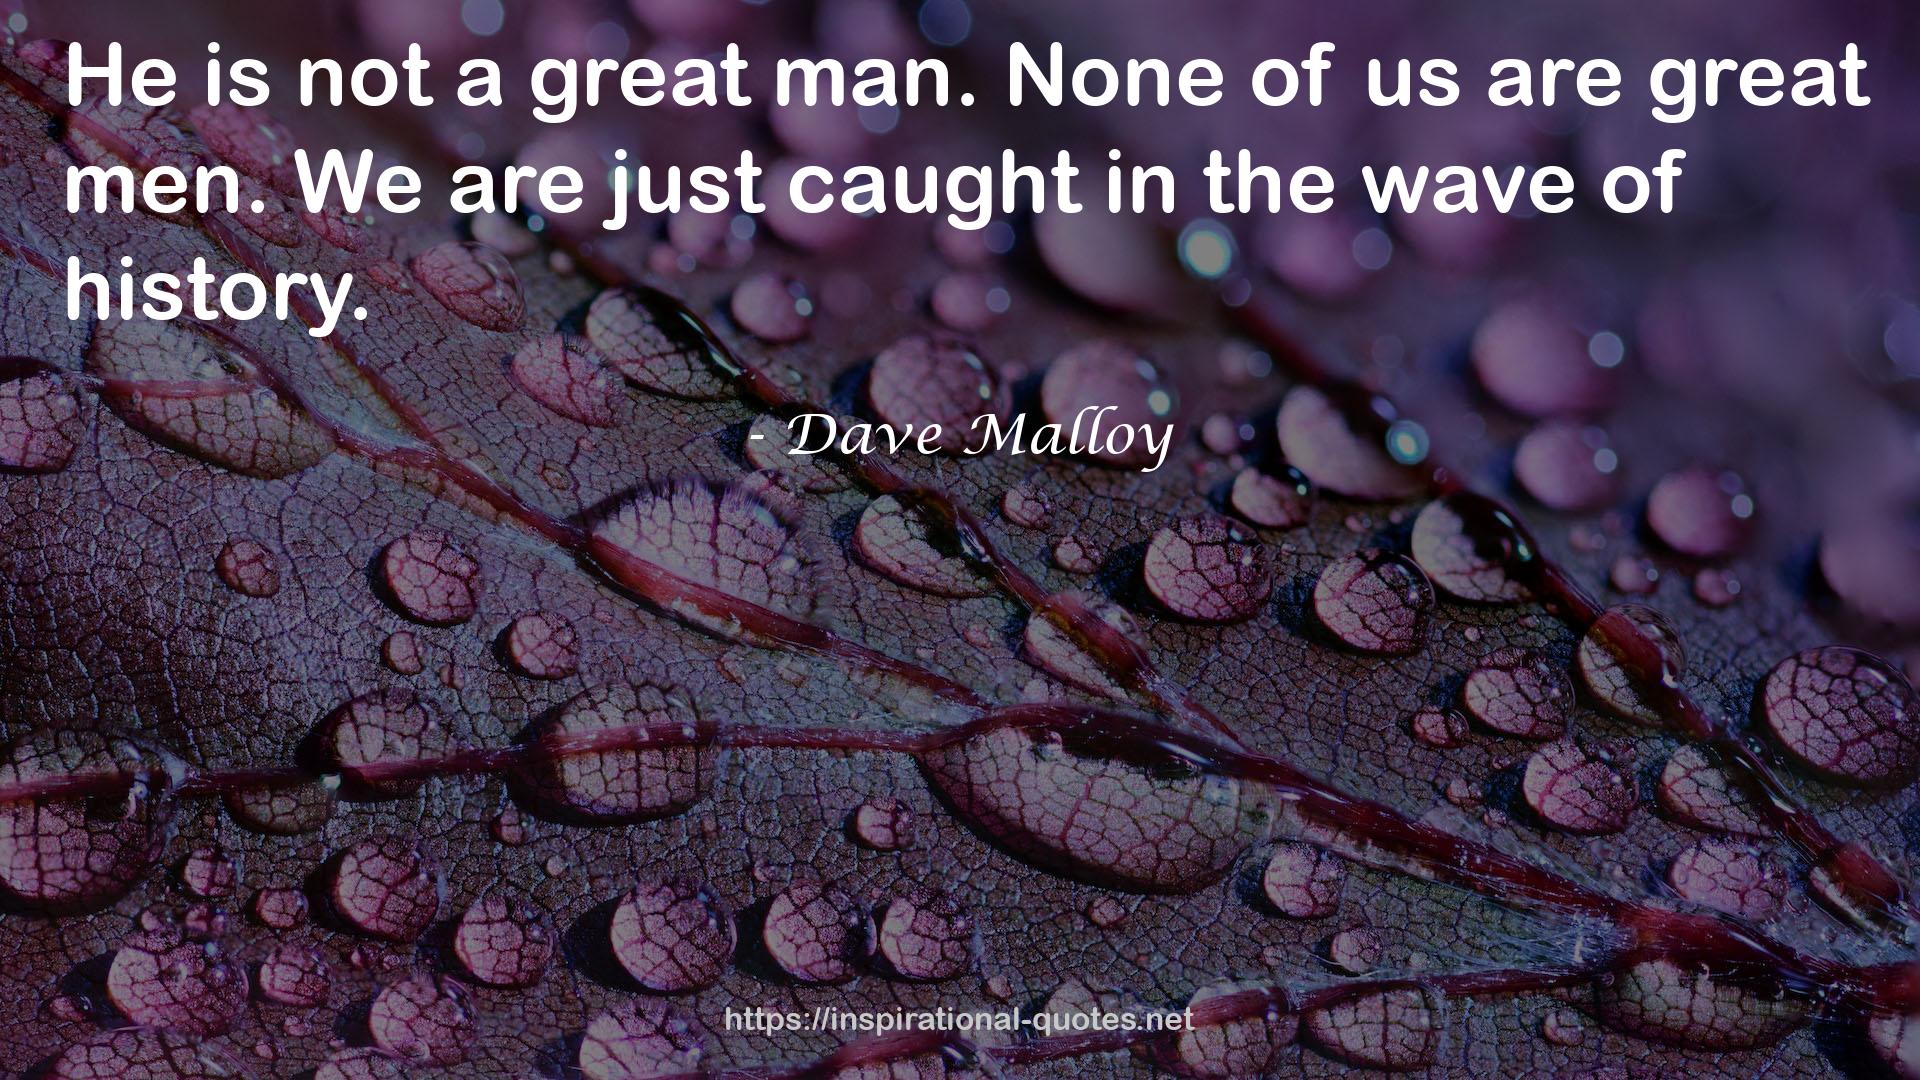 Dave Malloy QUOTES